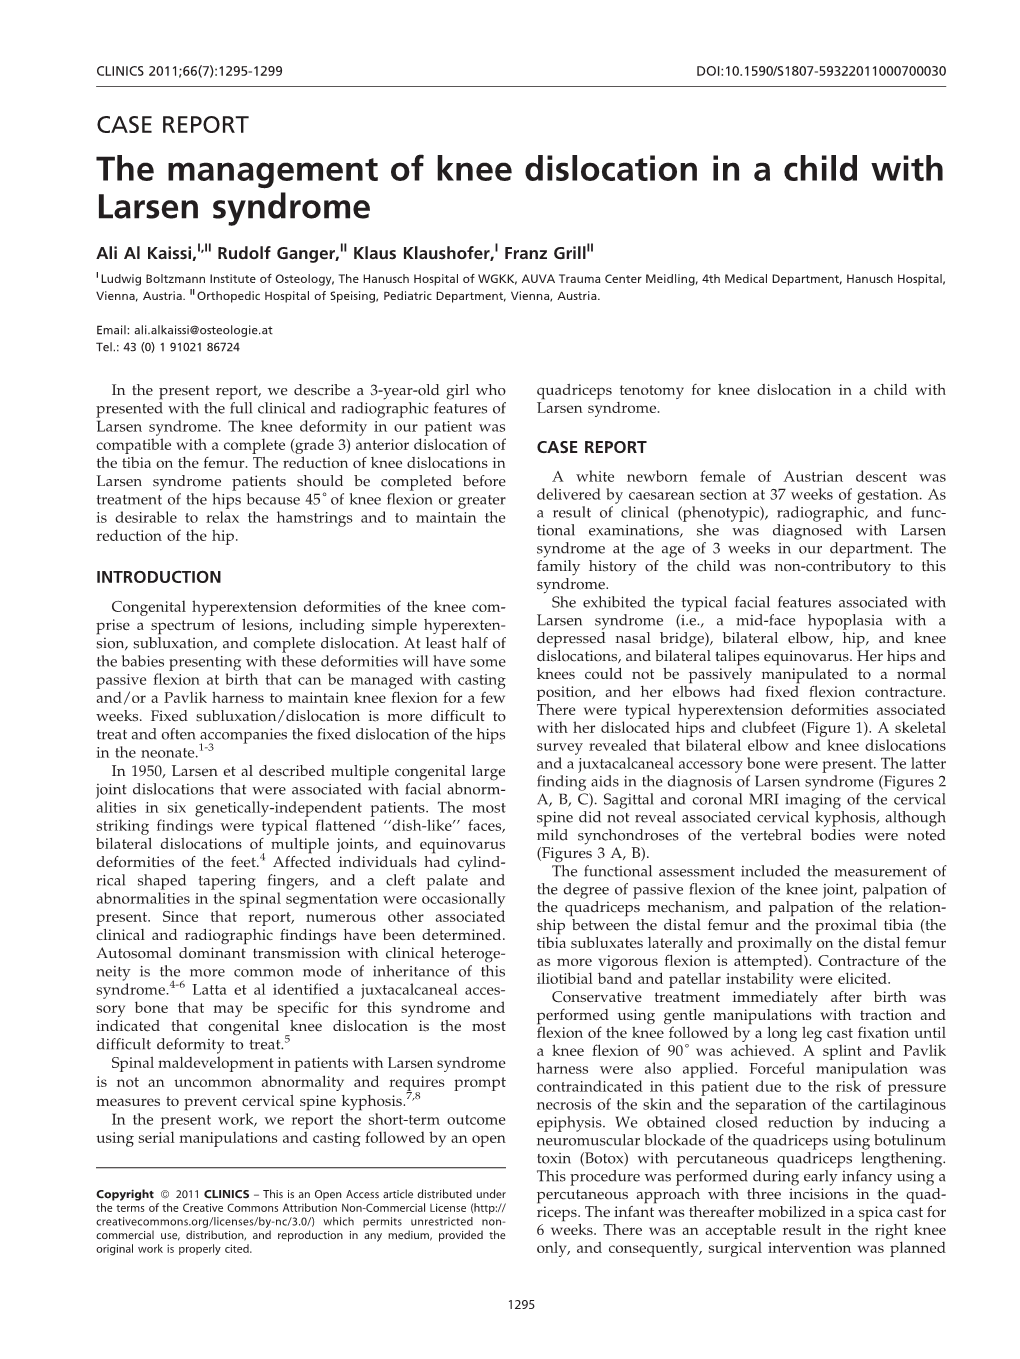 The Management of Knee Dislocation in a Child with Larsen Syndrome